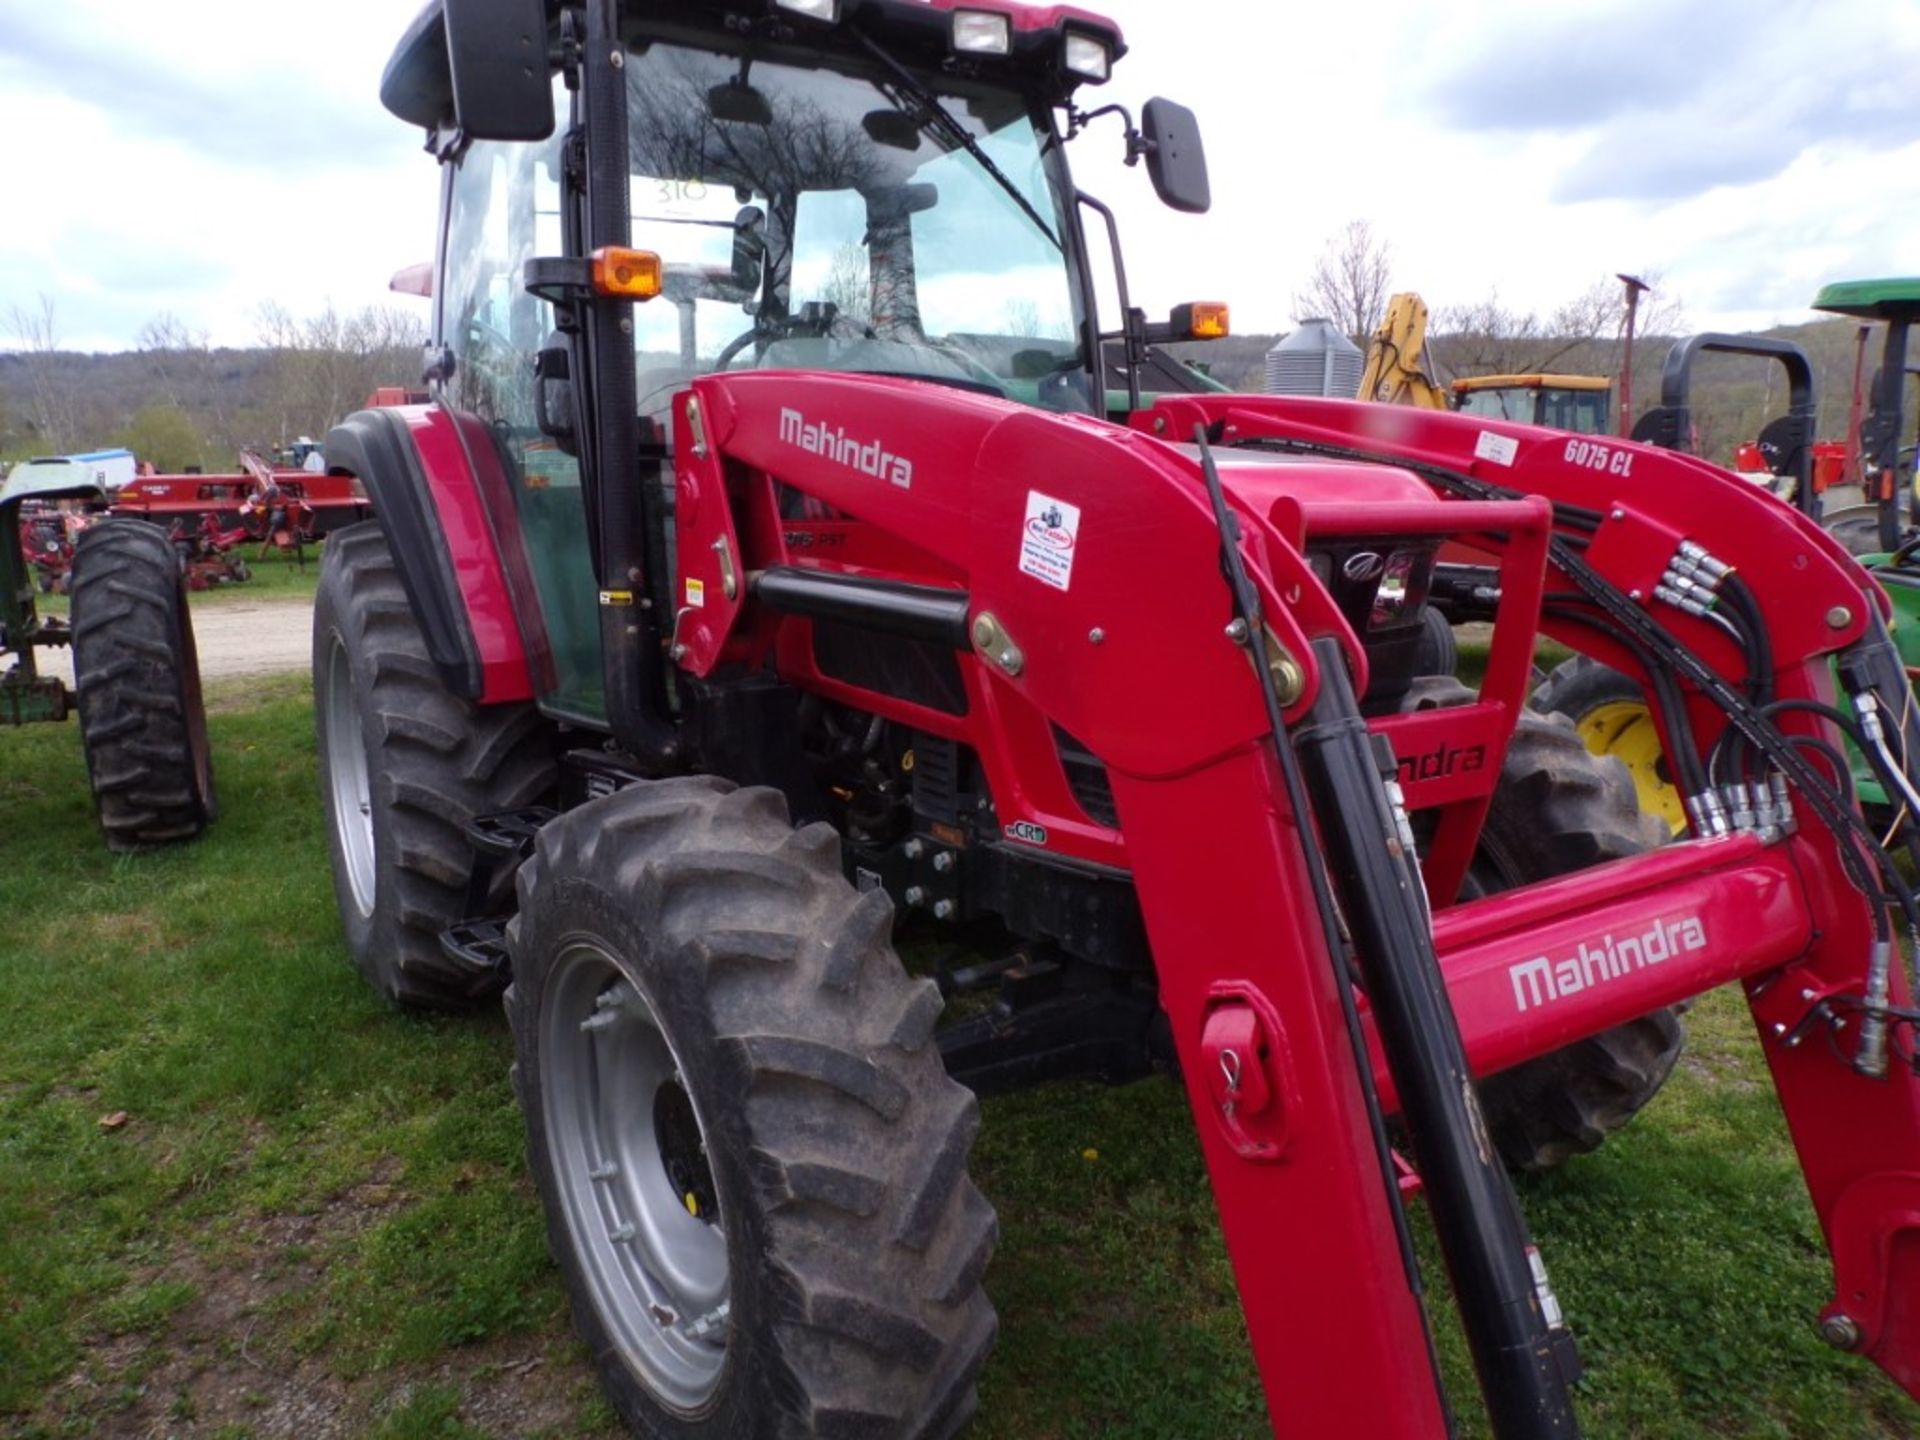 Mahindra 6075-PST 4 WD Tractor with 6075 CL Loader, Shuttle Trans., Skid Steer Bucket Coupler, - Image 4 of 8